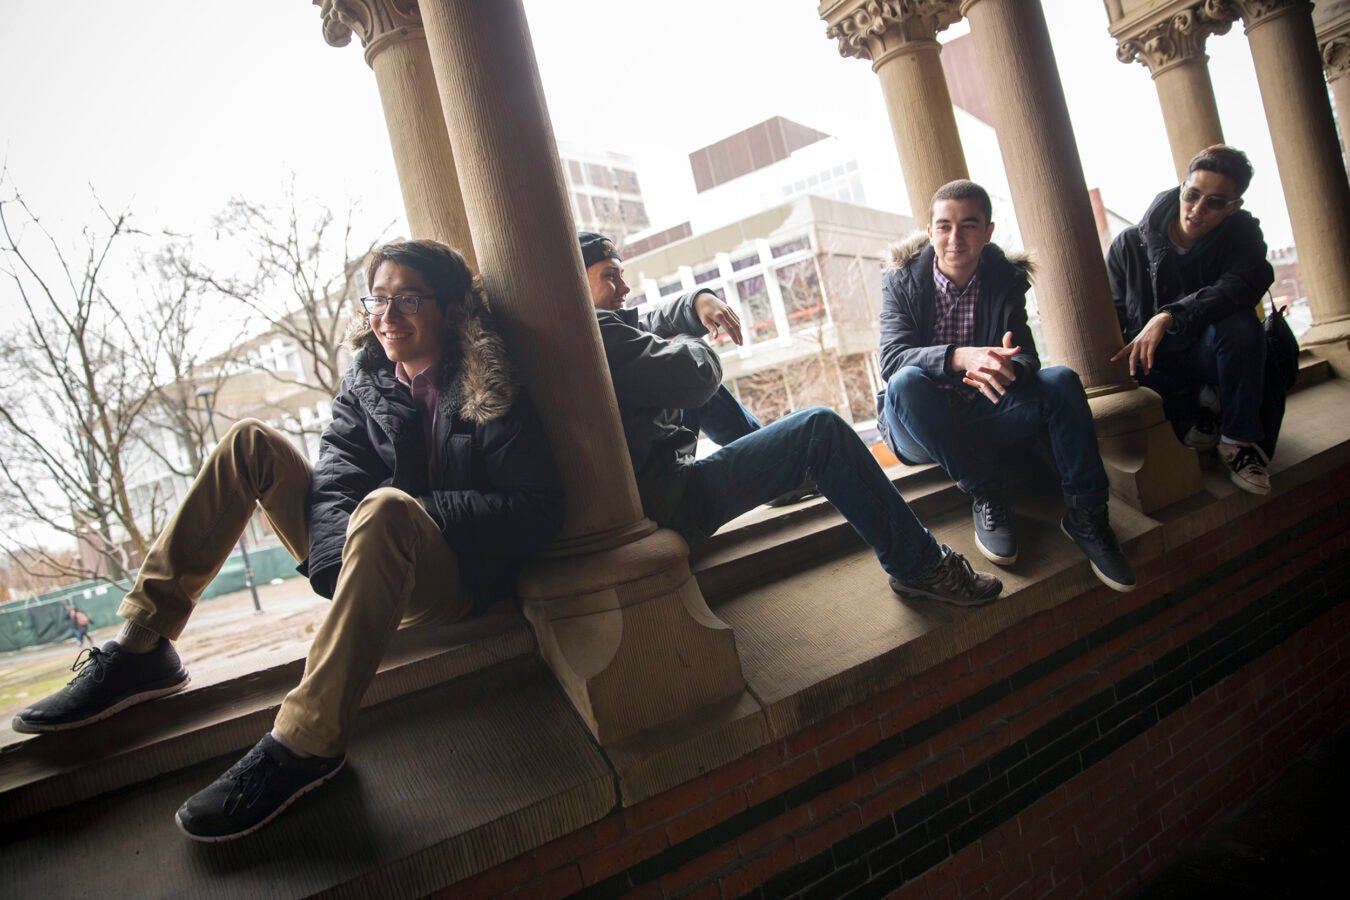 Roommates, Kenneth Shinozuka, (from left to right) and Clifford "Scotty" Courvoisier, Abdelrhman "Abdul" Saleh, Sung Ahn, All class of '20 who live in Holworthy Hall together, talk outside Annenberg Hall with the Science Center in the background.